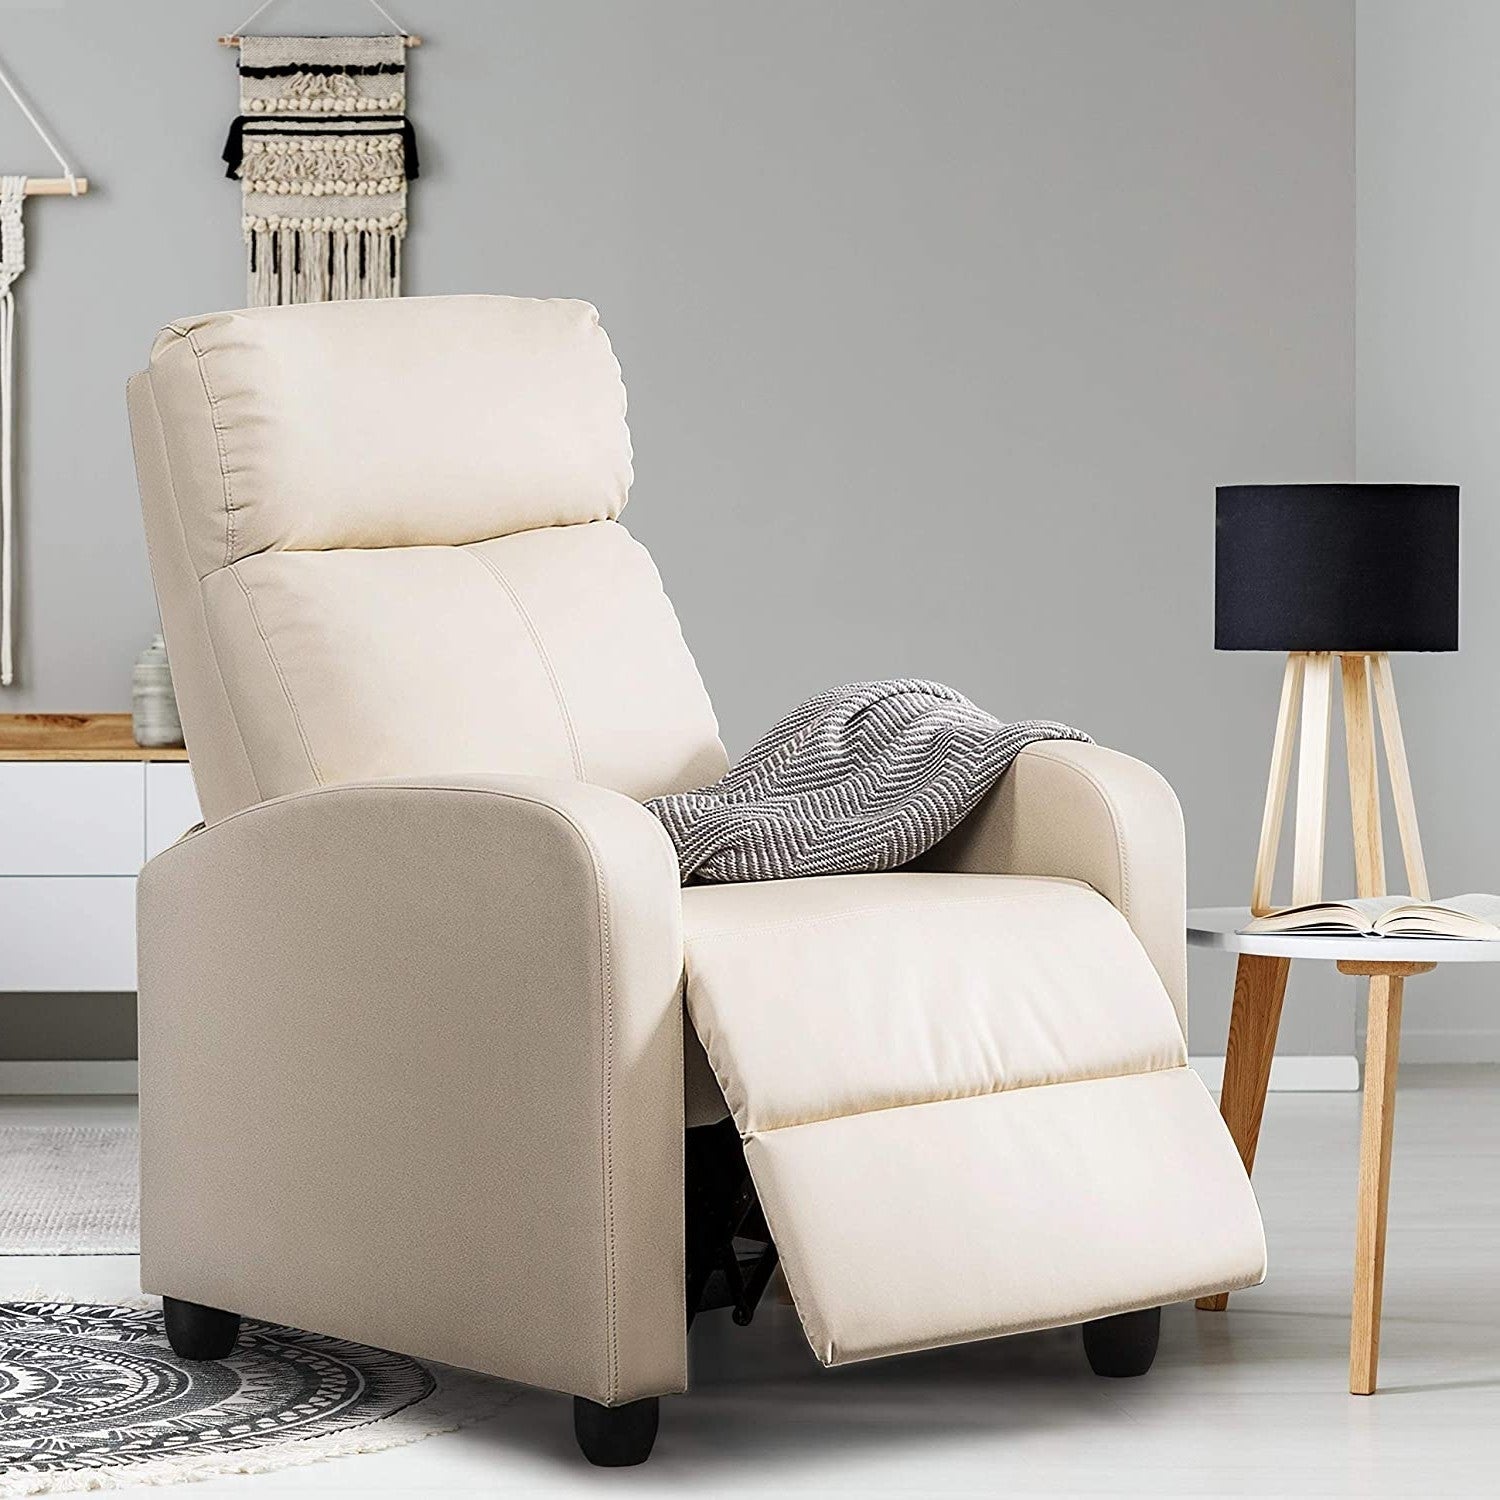 Living Room > Recliners And Chaise Lounge - Off White High-Density Faux Leather Push Back Recliner Chair